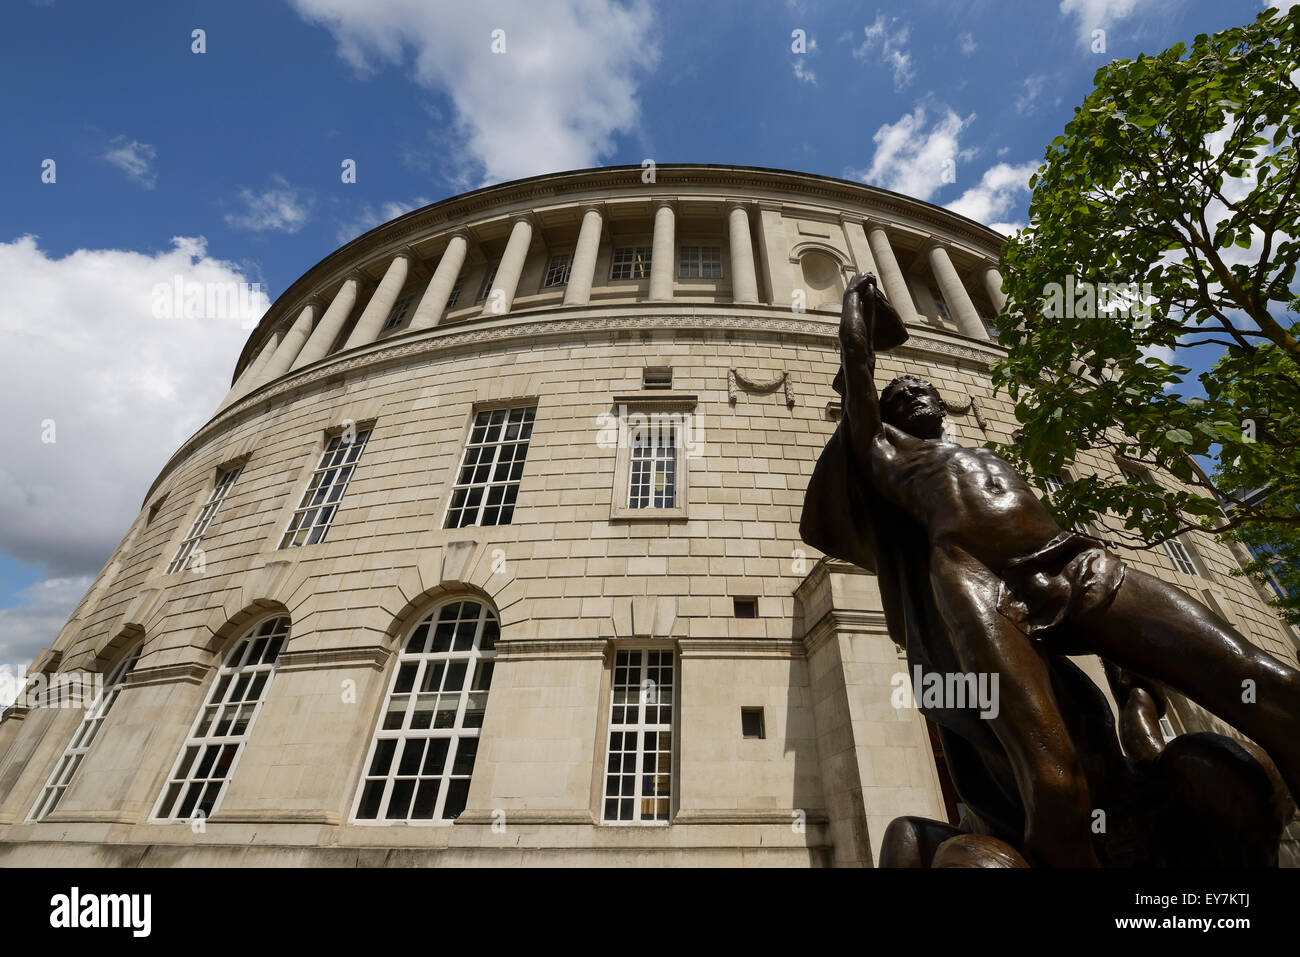 The exterior of Manchester Central Library in Manchester city centre UK Stock Photo